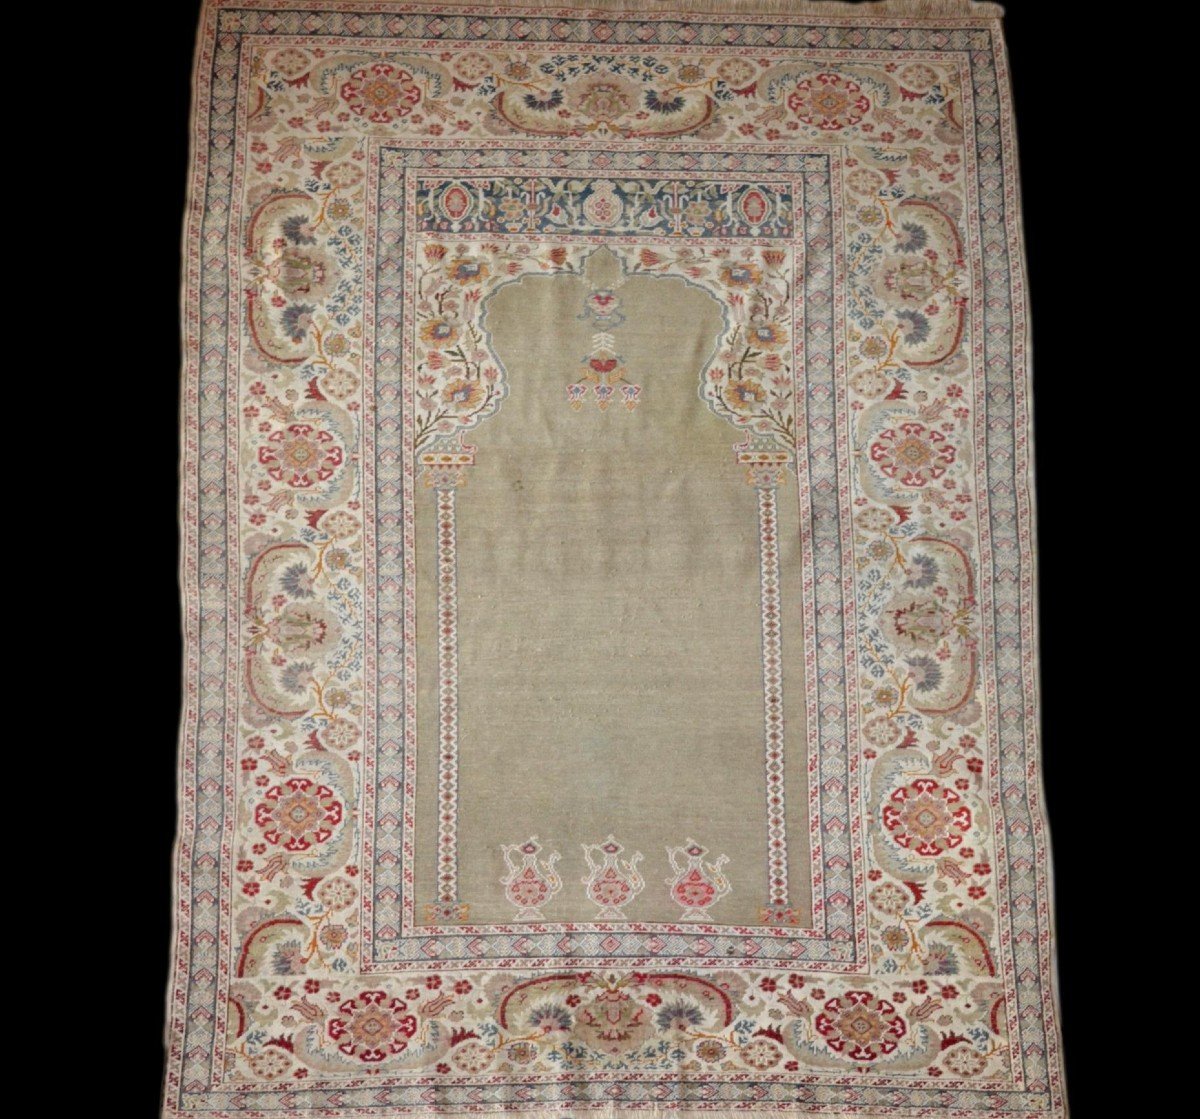 Old Istanbul Prayer Rug, Silk And Wool, 128 Cm X 179 Cm, Ottoman Empire, Early 20th Century